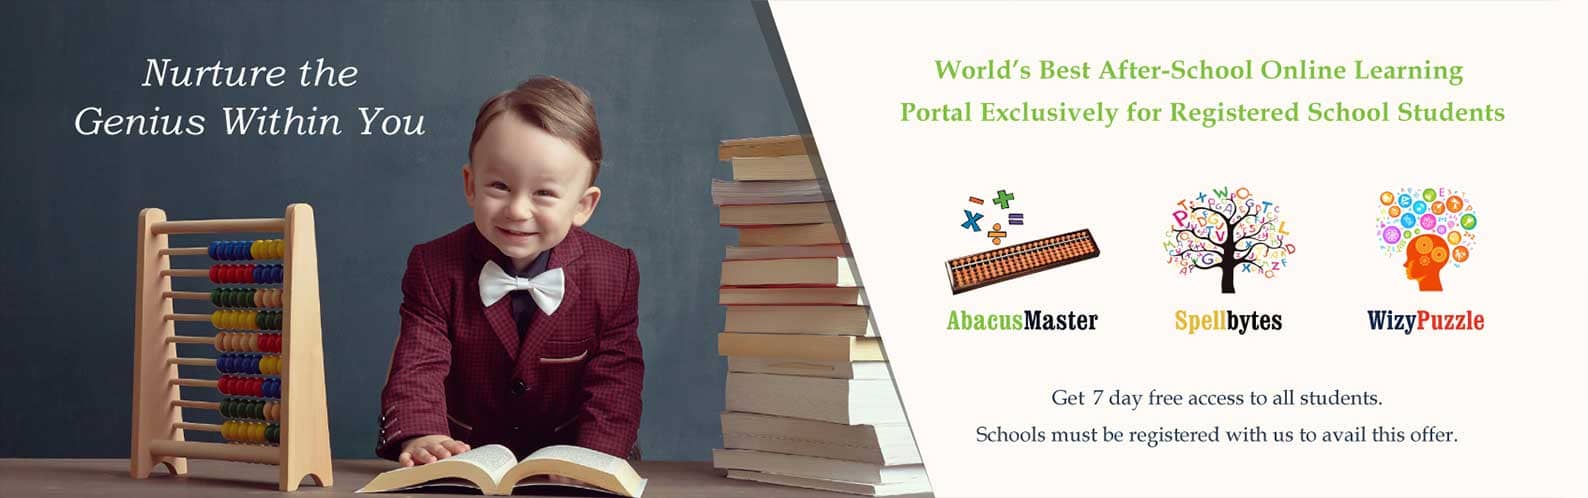 abacus education in all primary secondary kindergarten schools to improve skills of students